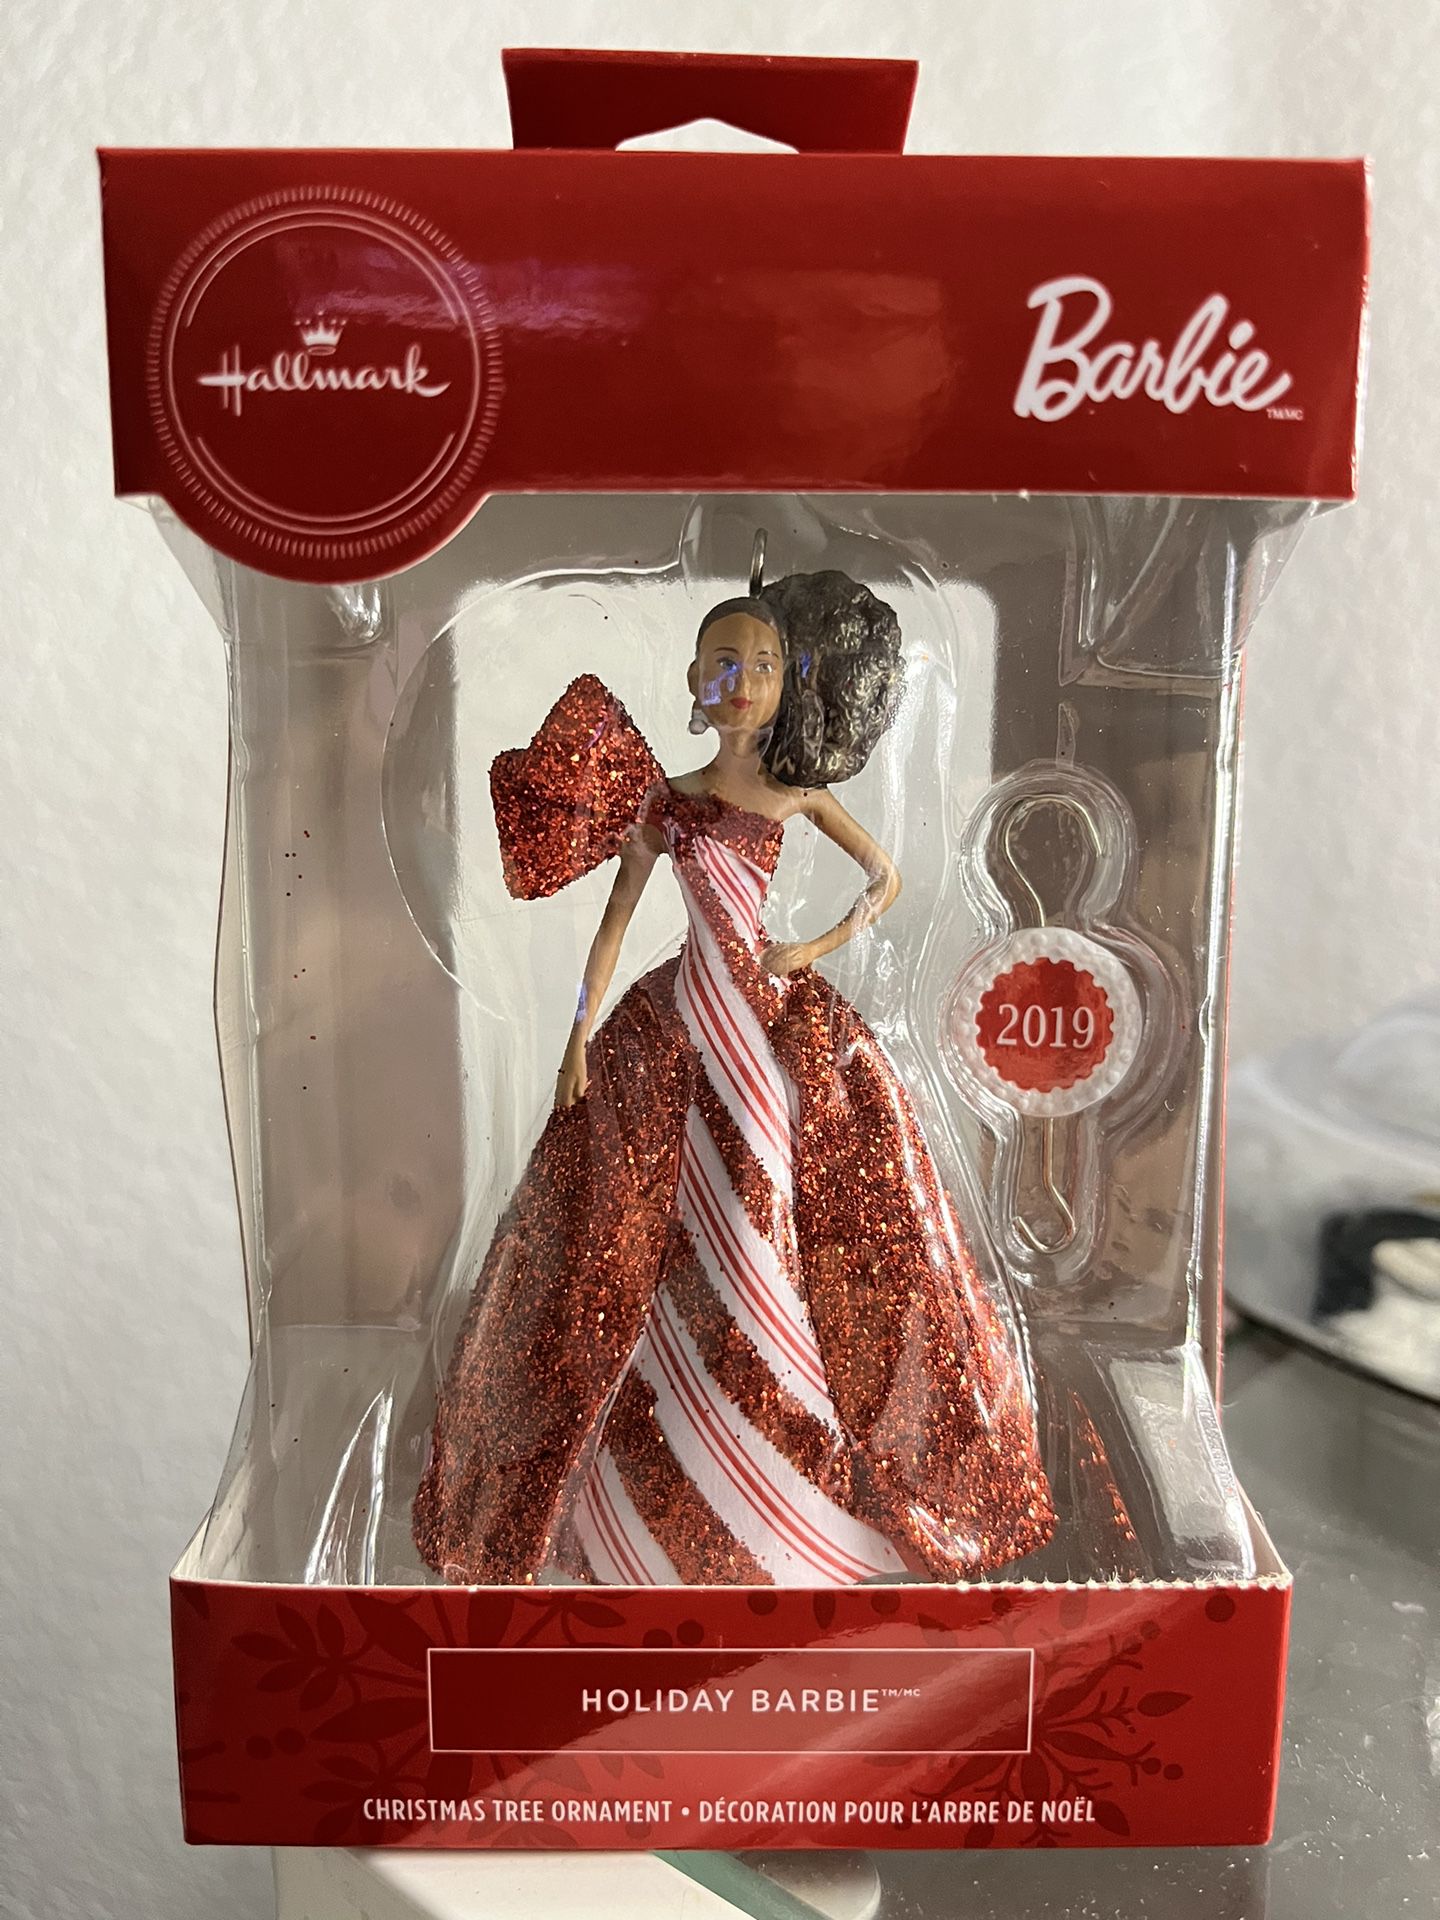  2019 Hallmark HOLIDAY BARBIE Ornament AFRICAN AMERICAN Barbie Candy Cane Gown